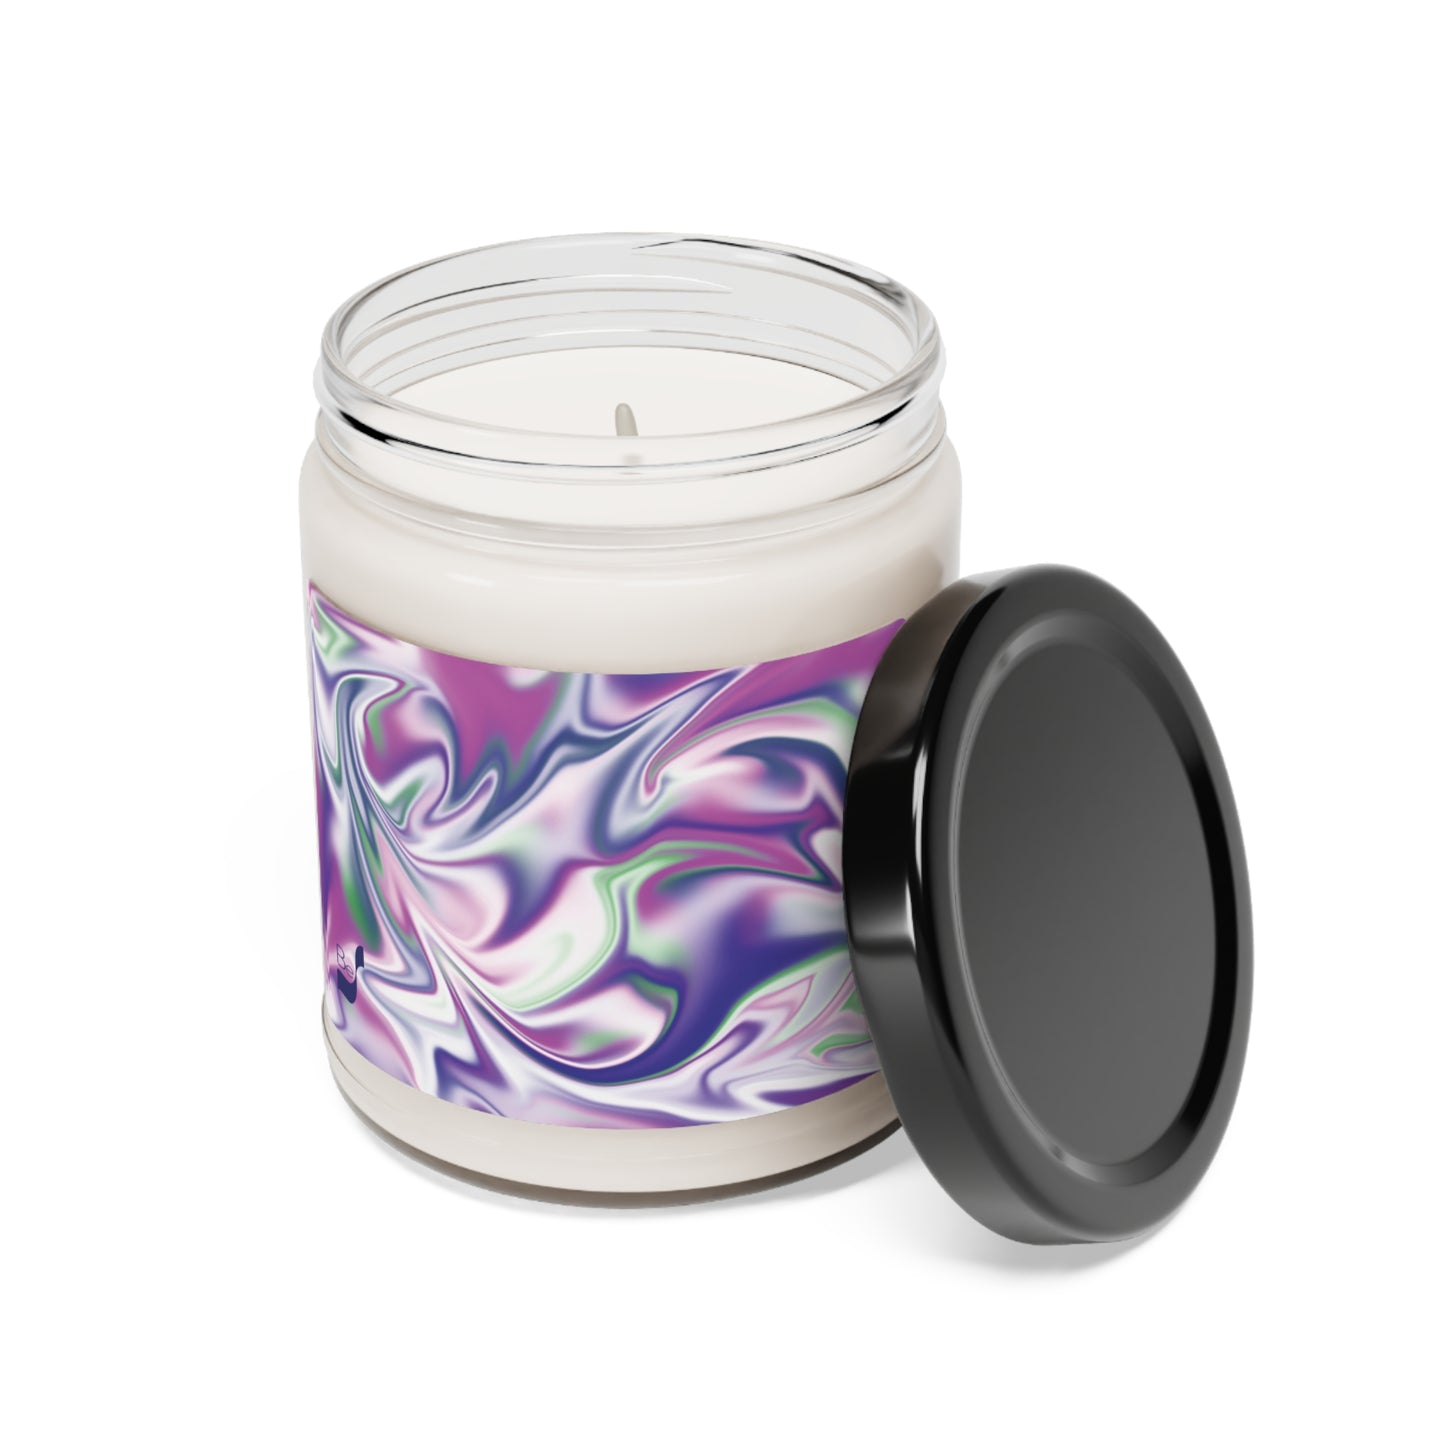 Burst BeSculpt Scented Soy Candle, 9oz R